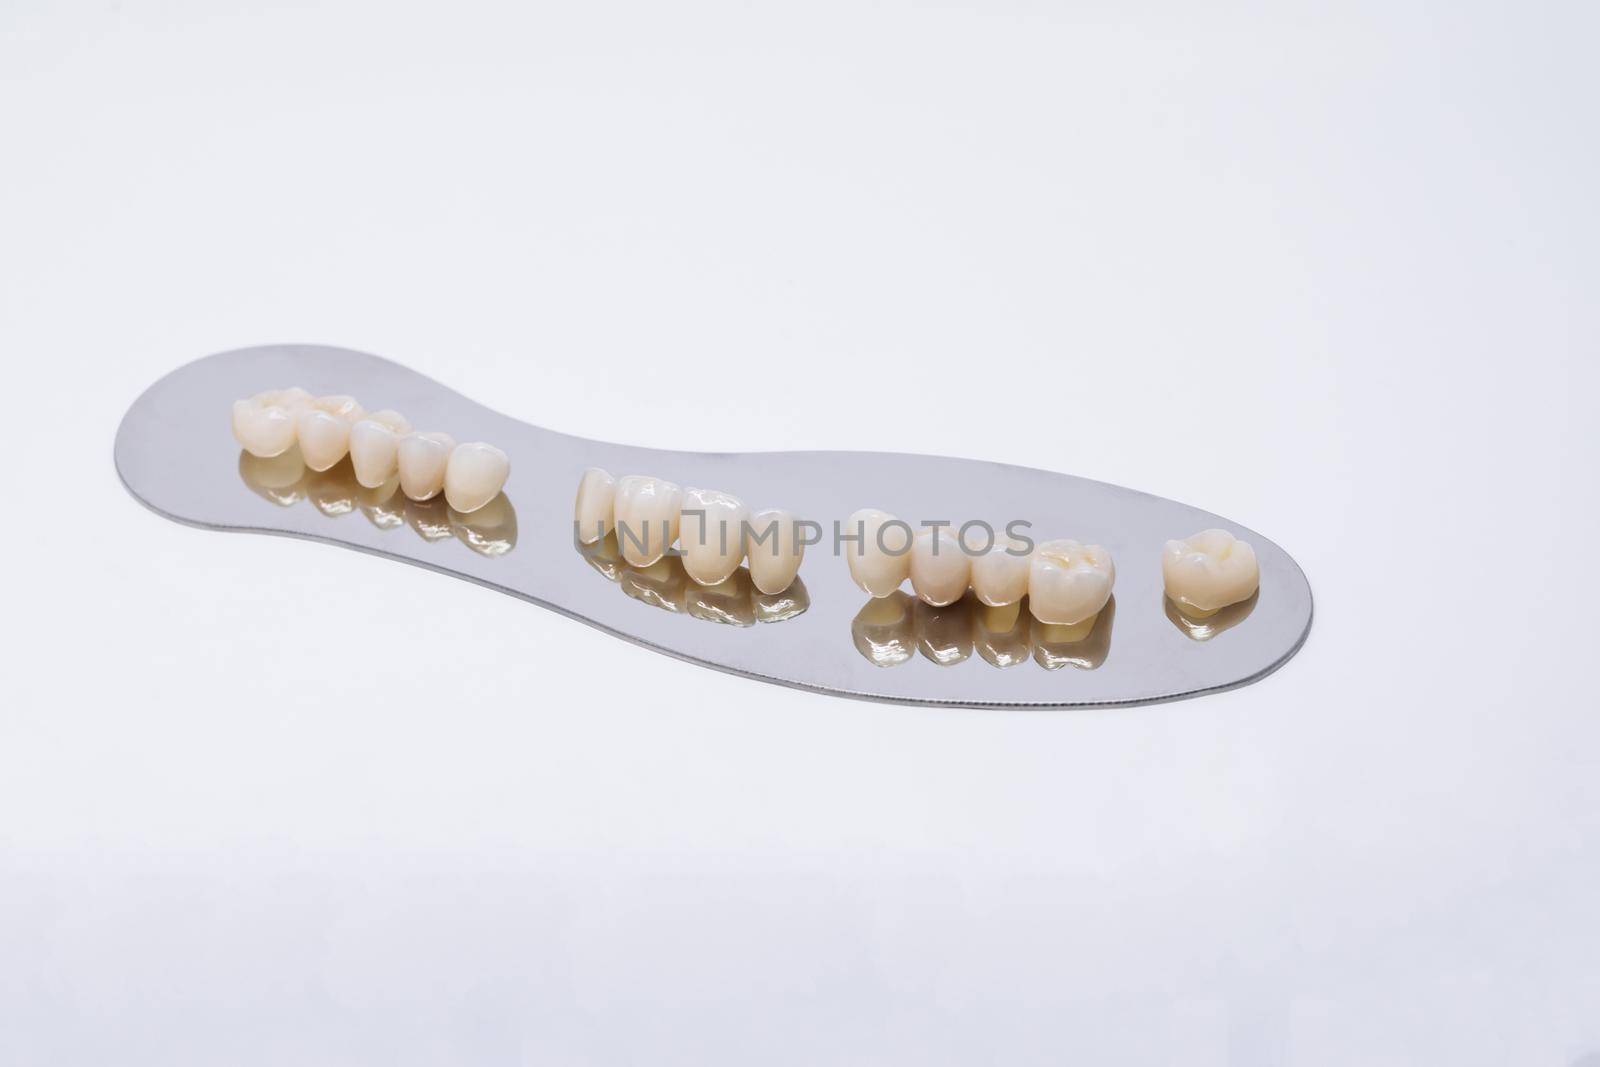 Ceramic zirconium in final version. Metal Free Ceramic Dental Crowns. Zirconium tooth crown Isolate on wite background. Aesthetic restoration of tooth loss.